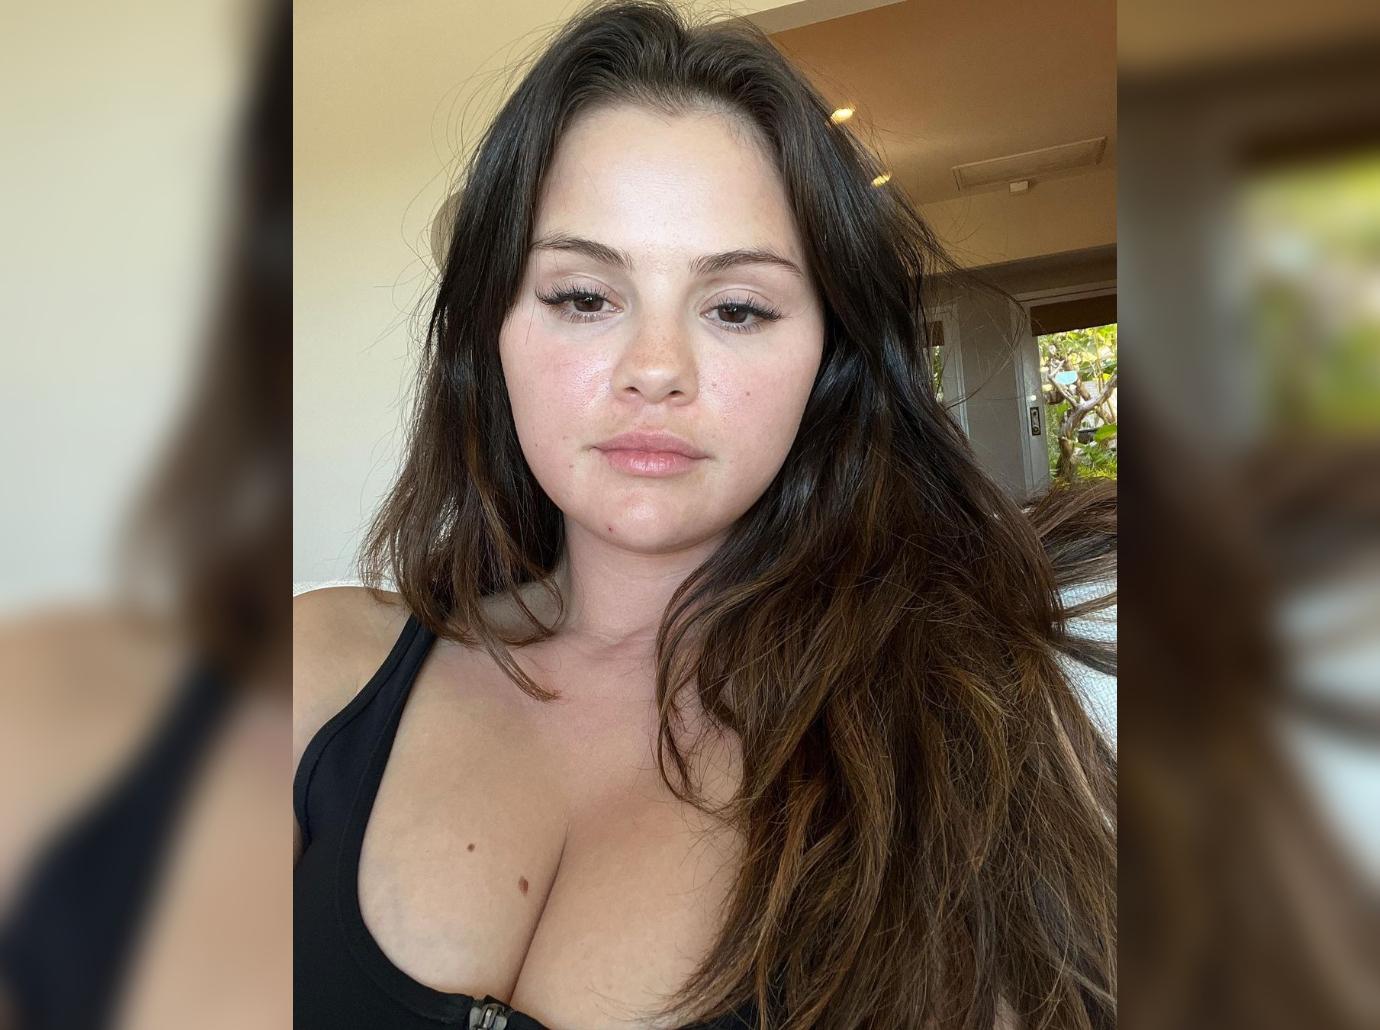 Selena Gomez Shows Off Natural Beauty After Hailey Bieber Drama